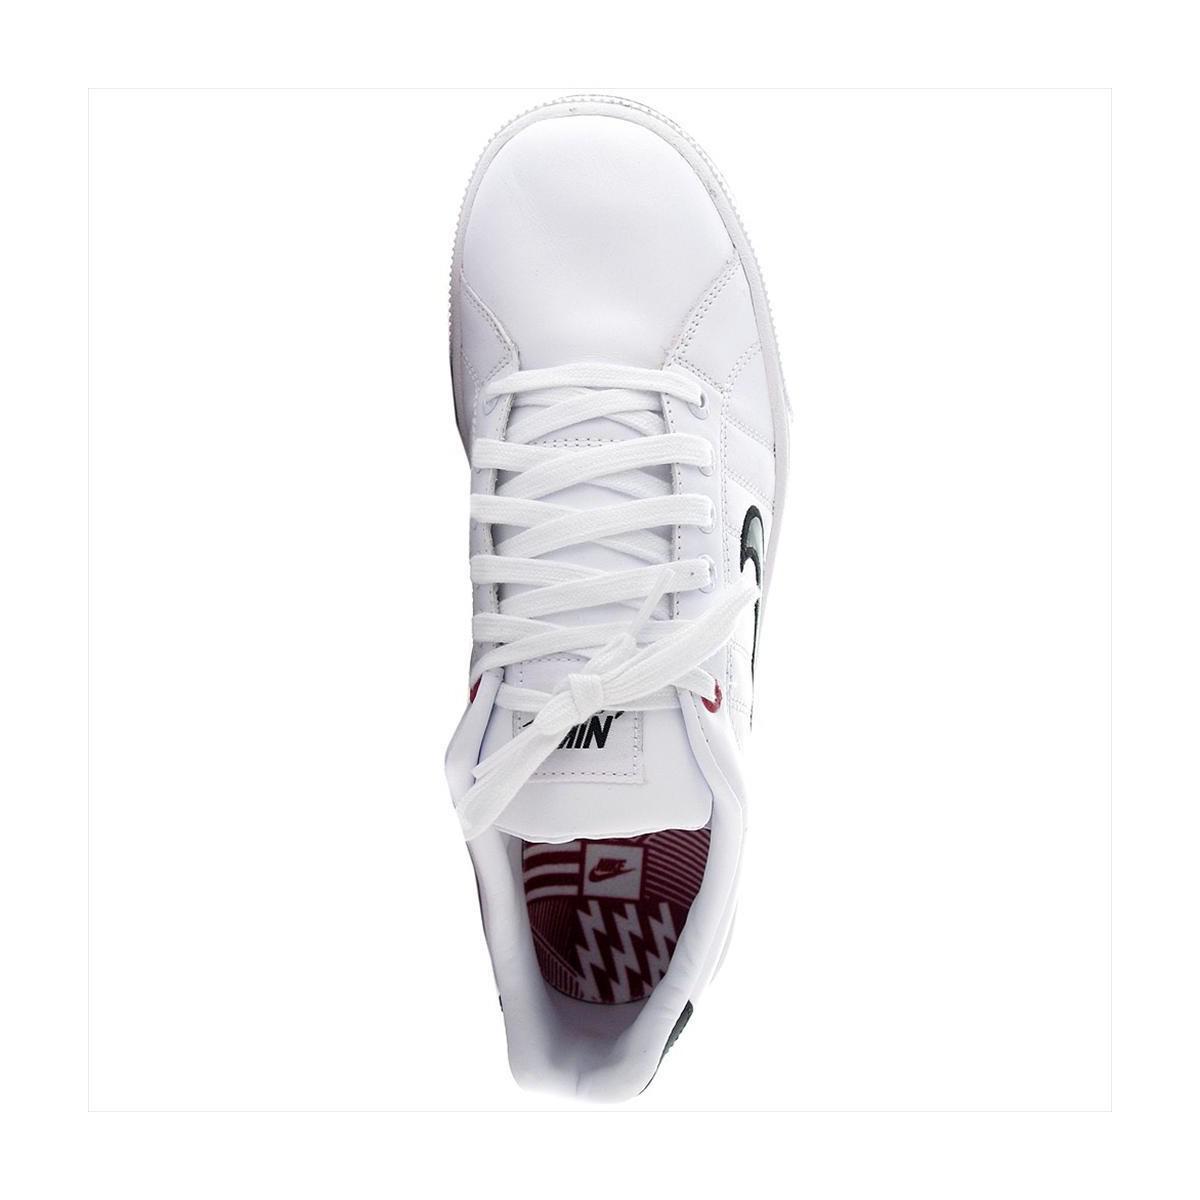 nike court tradition 2 mens